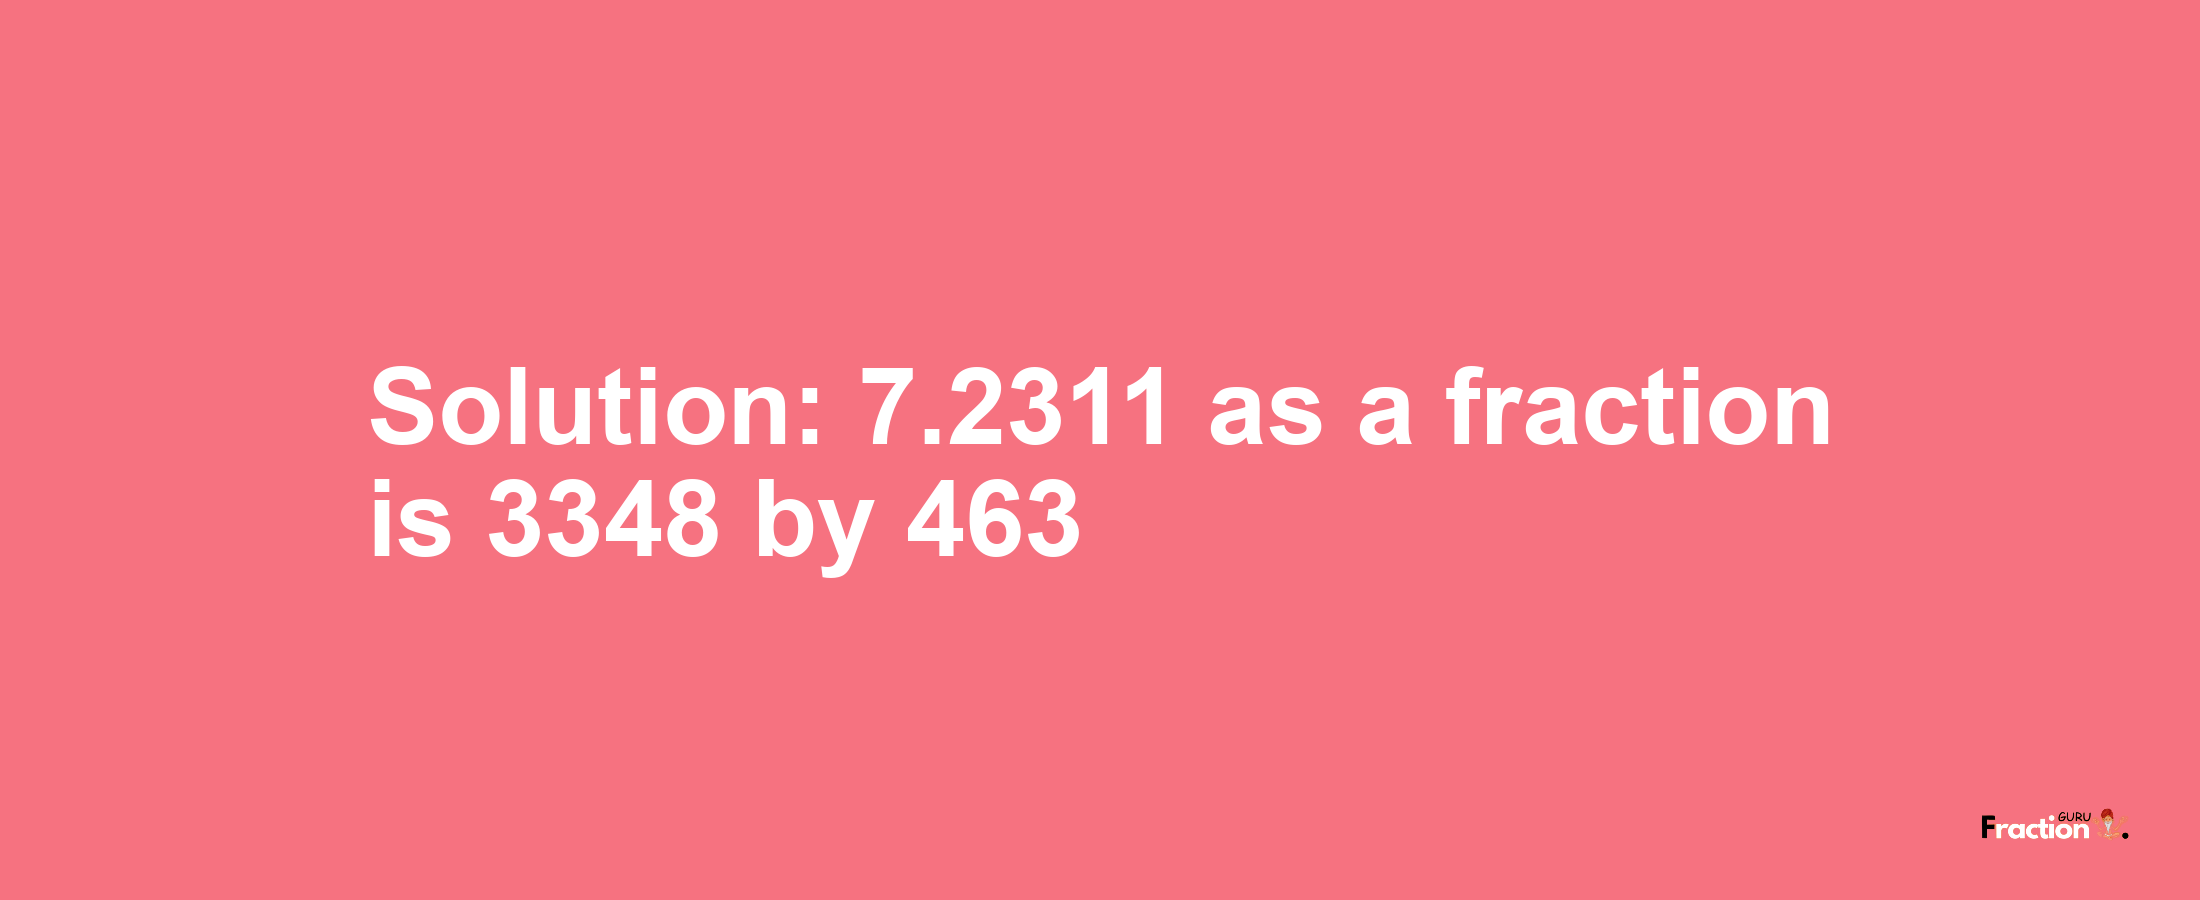 Solution:7.2311 as a fraction is 3348/463